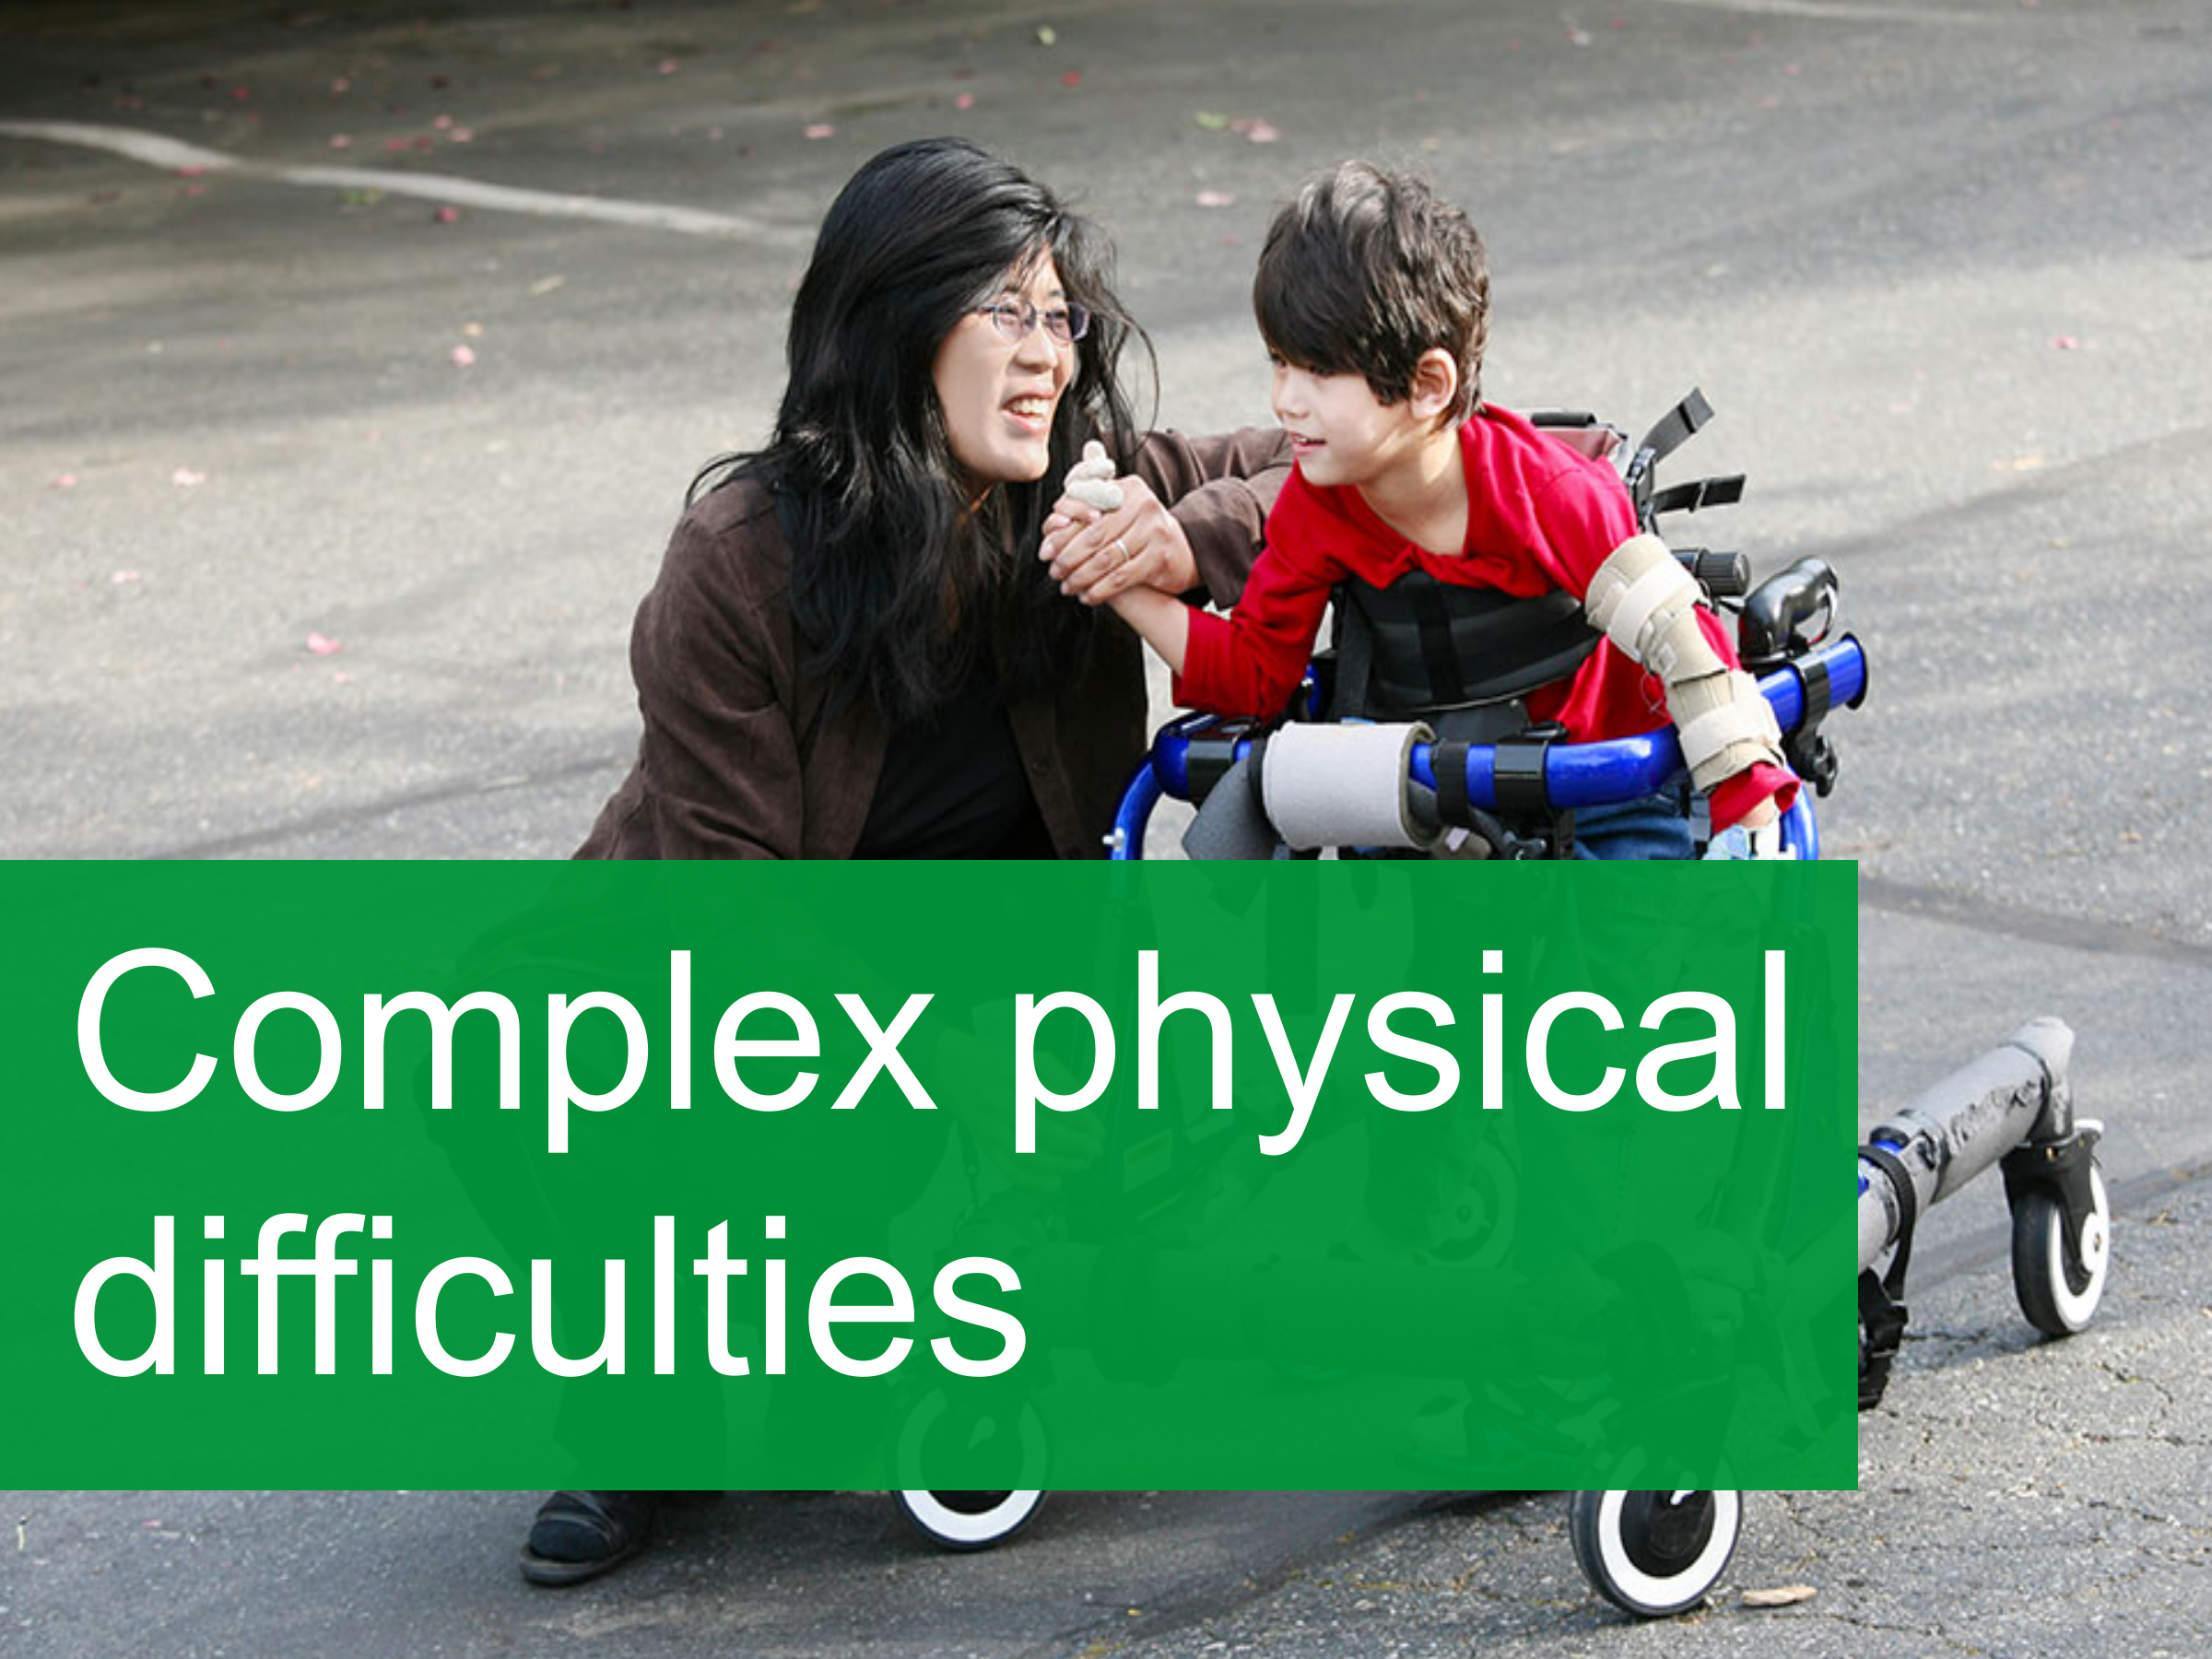 Complex physical difficulties